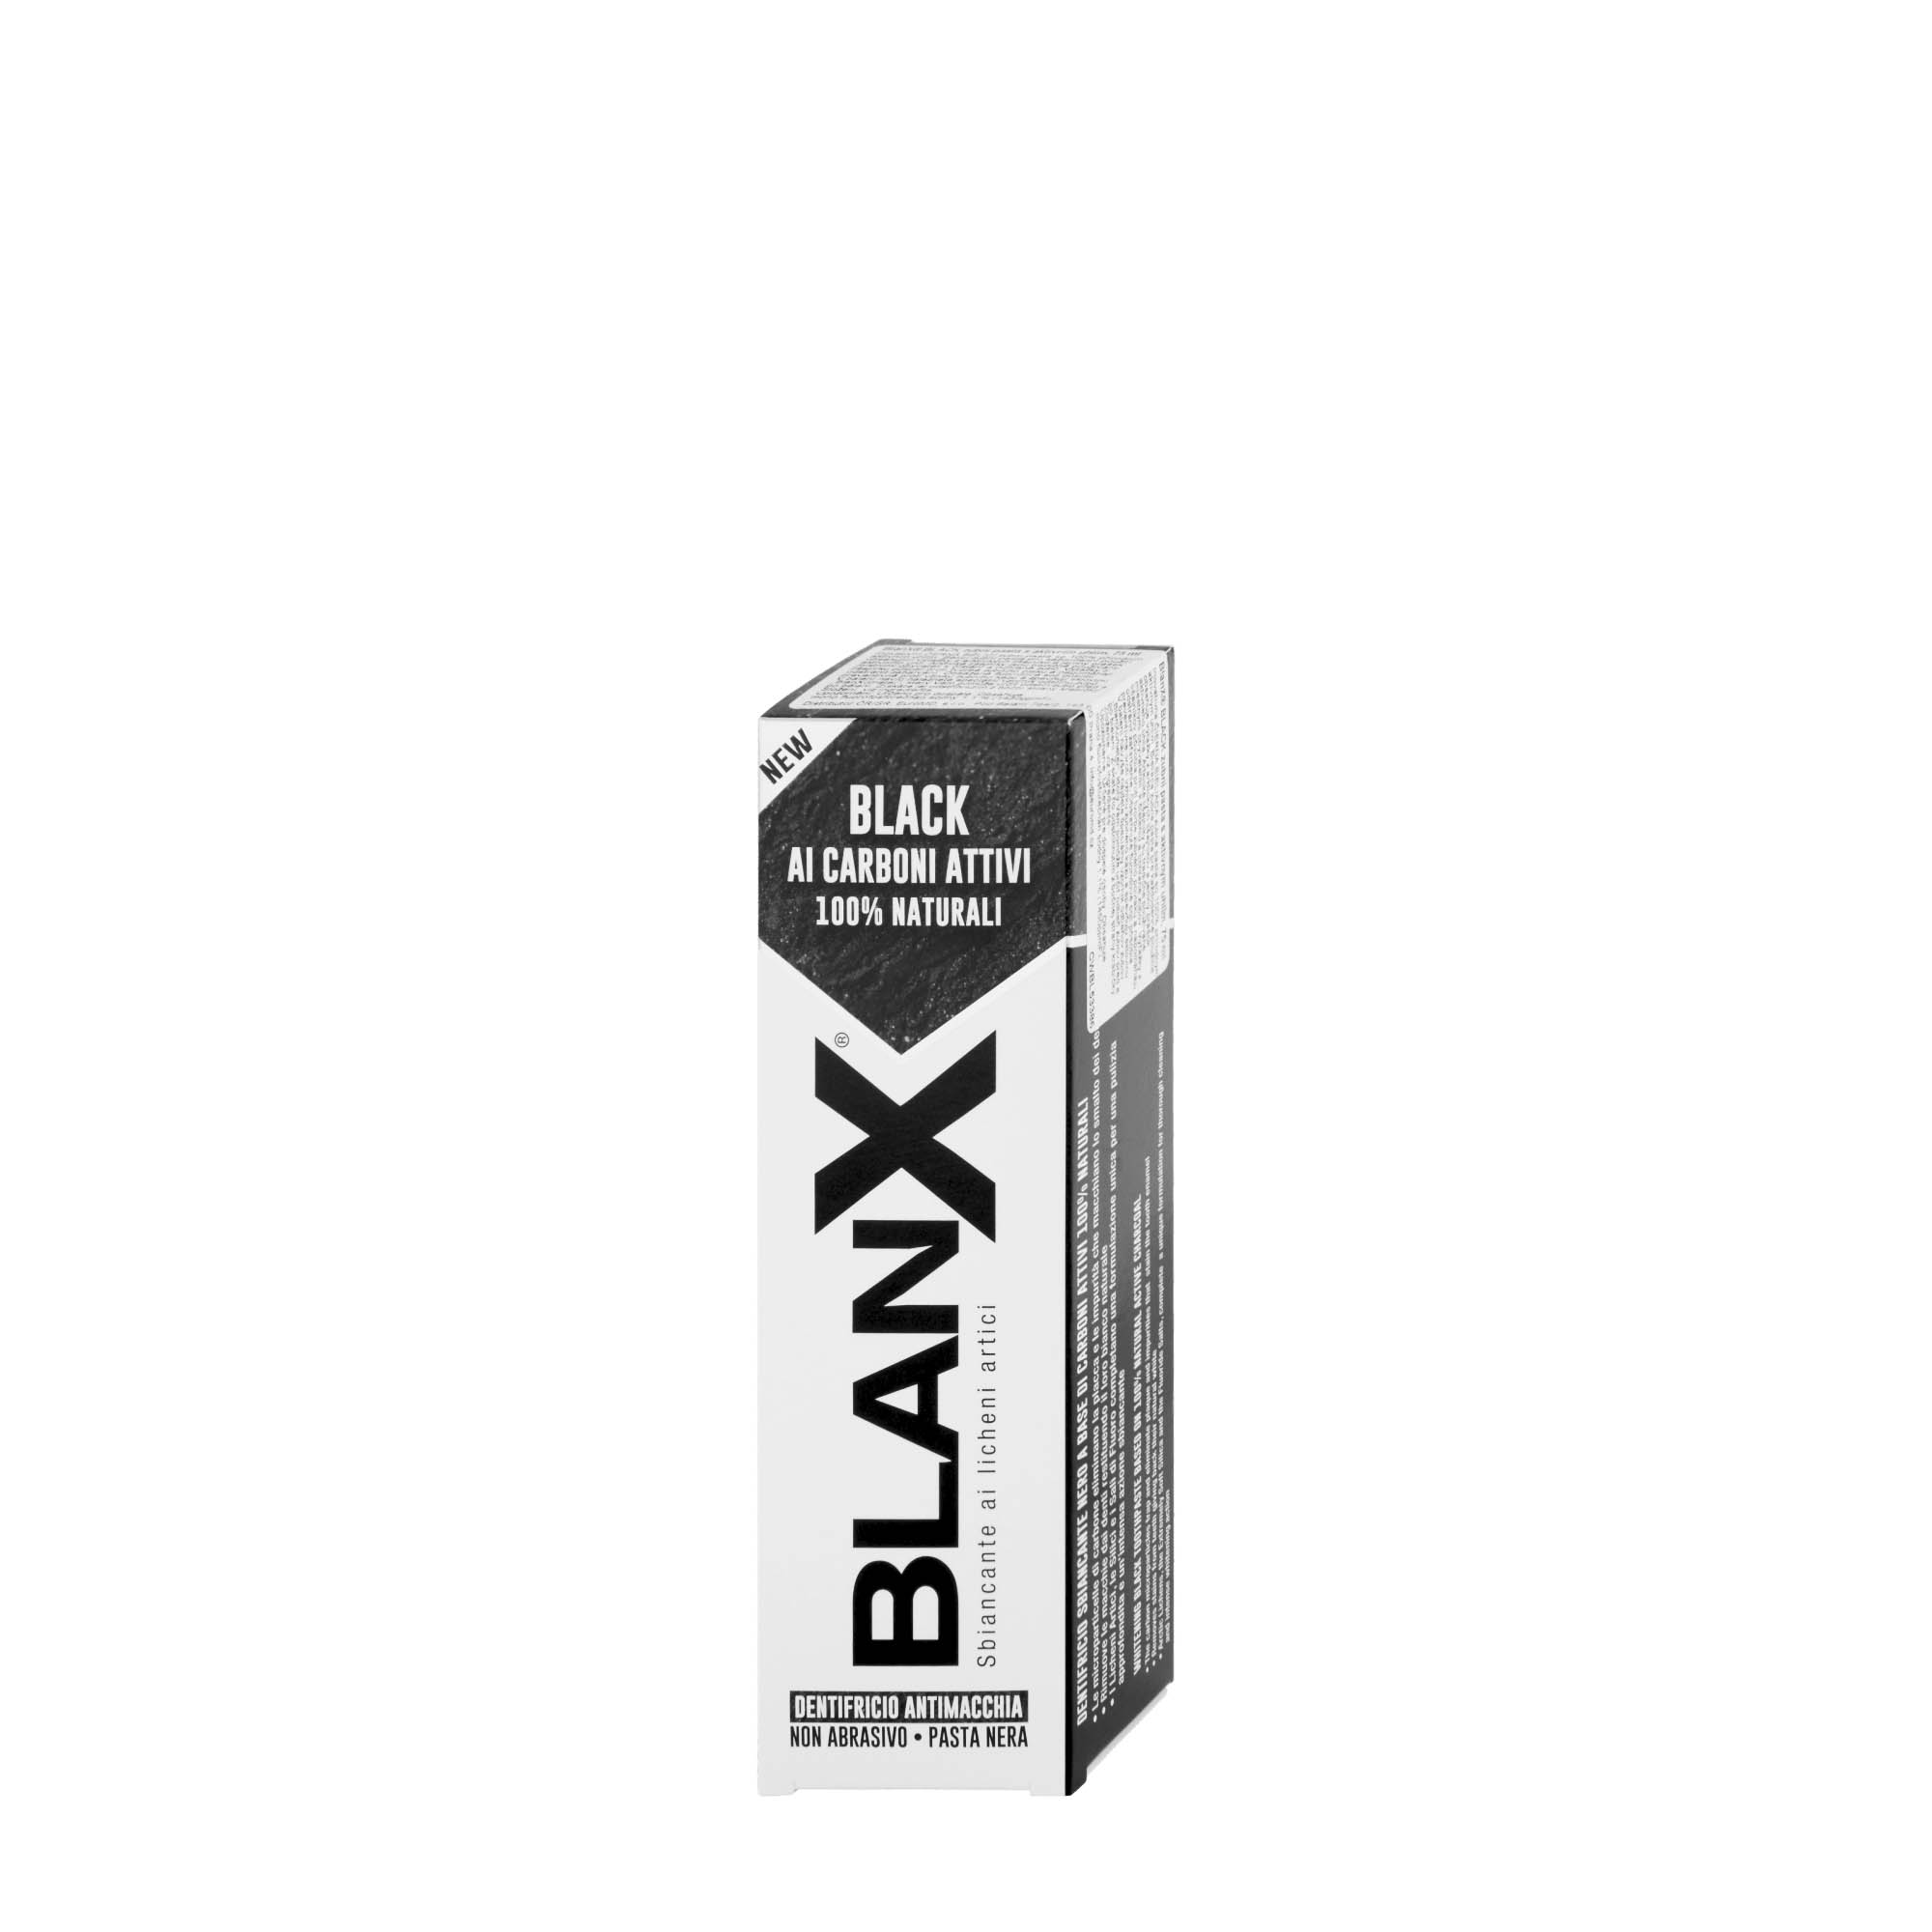 blanx toothpaste black activated charcoal whitening